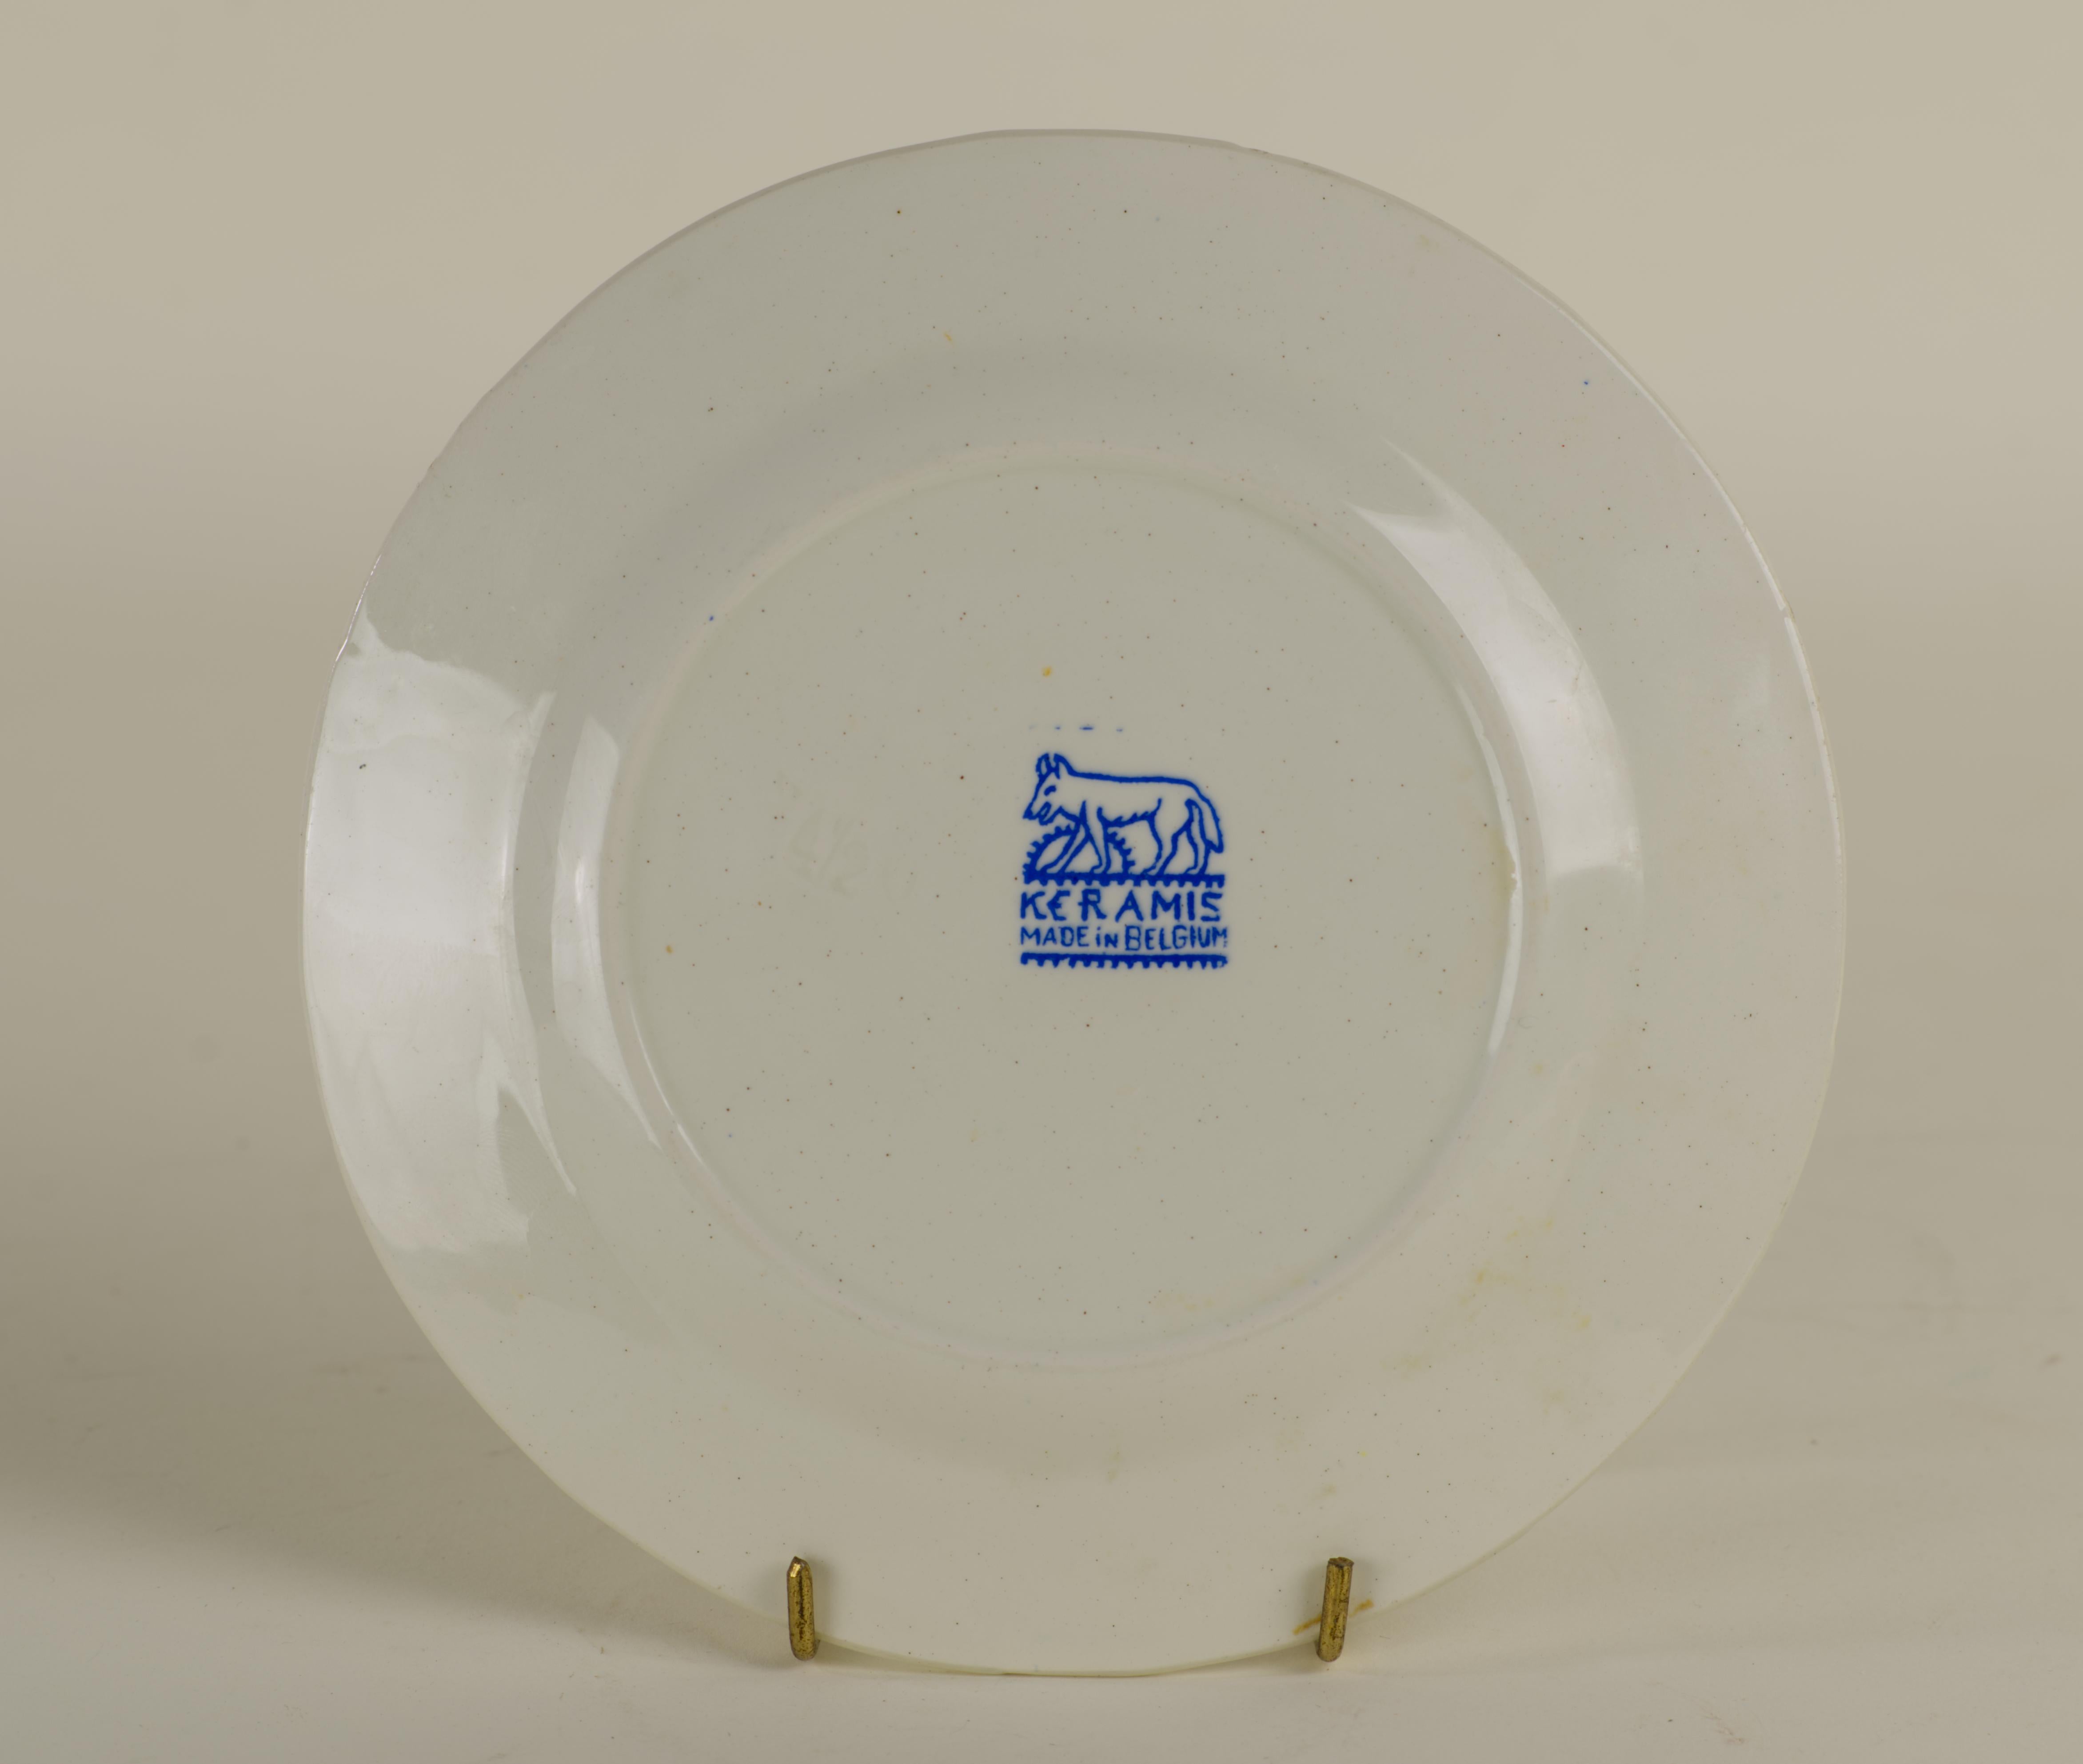 20th Century Charles Catteau for Boch Freres Keramis, Set of Small Bowl and Small Plate For Sale